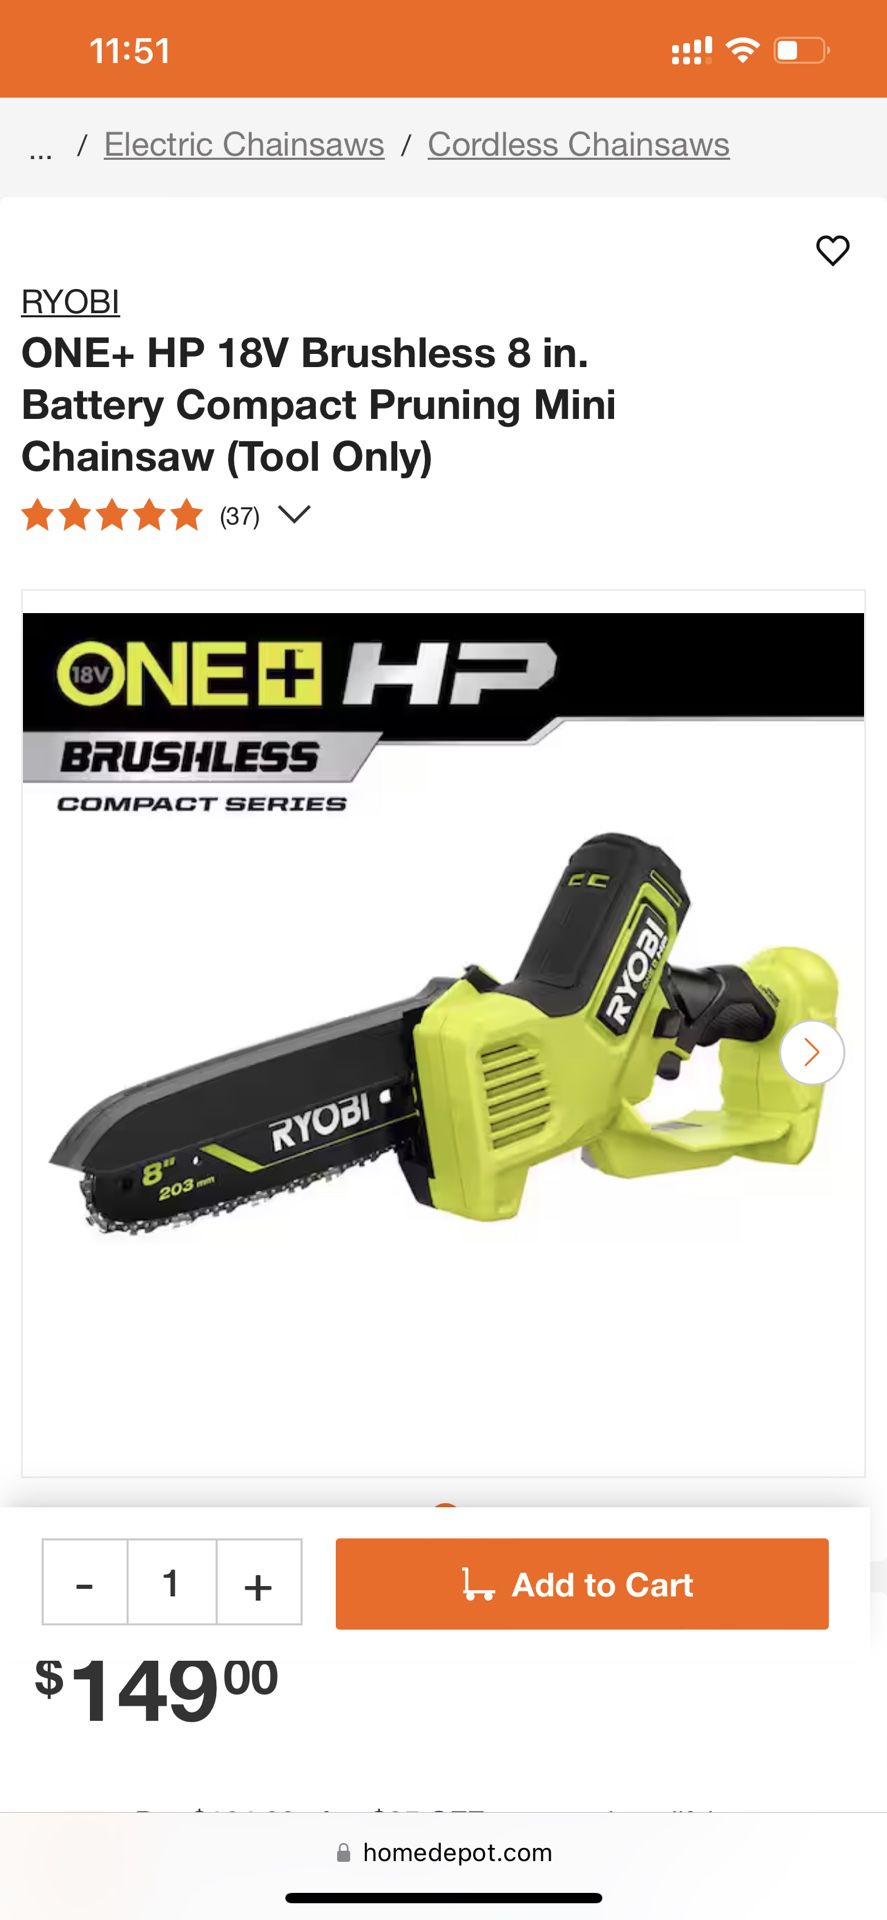 RYOBI ONE+ HP 18V Brushless 8 in. Battery Compact Pruning Mini Chainsaw (Tool Only)/psbcw01b